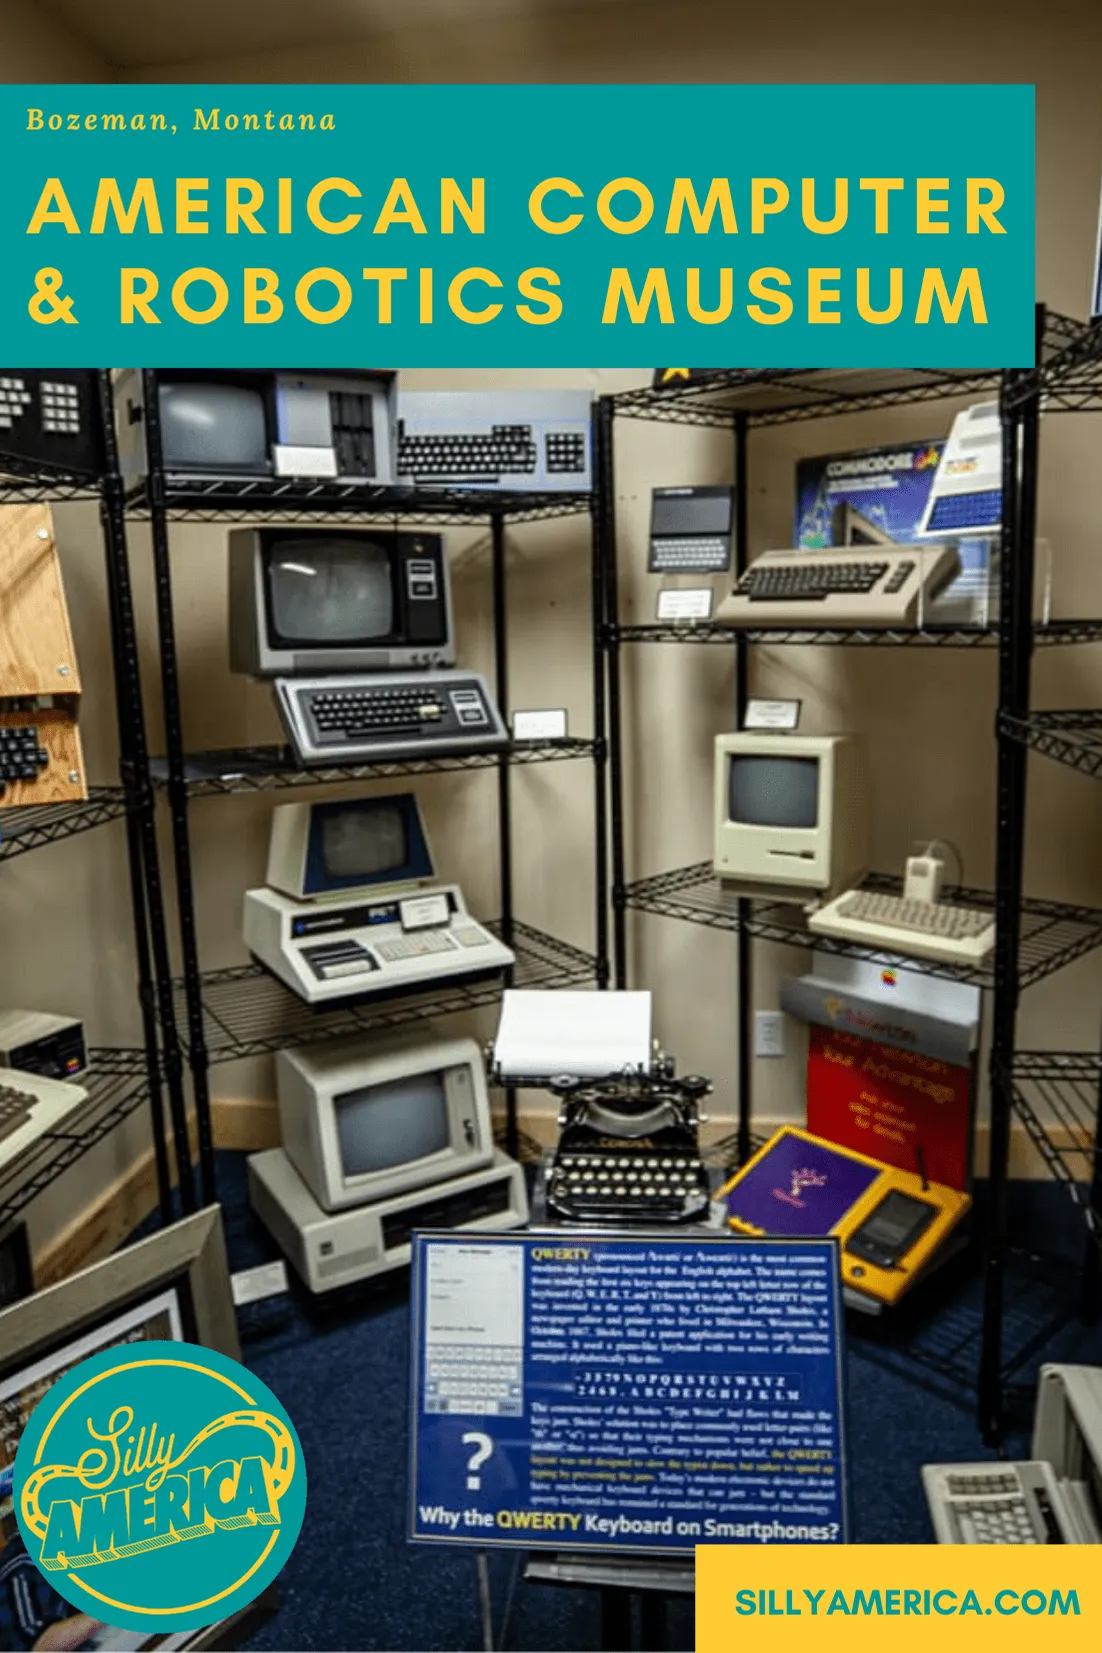 The American Computer & Robotics Museum in Bozeman, Montana features a comprehensive history of the computer with "4,000 years of humanity and technology." #MontanaRoadsideAttractions #MontanaRoadsideAttraction #RoadsideAttractions #RoadsideAttraction #RoadTrip #MontanaRoadTrip #MontanaRoadTripMap #MontanaRoadTripItinerary #MontanaRoadTripBucketLists #MontanaBucketList #MontanaRoadTripIdeas #MontanaWinterRoadTrip #MontanaRoadTripWithKids #MontanaRoadWithKids